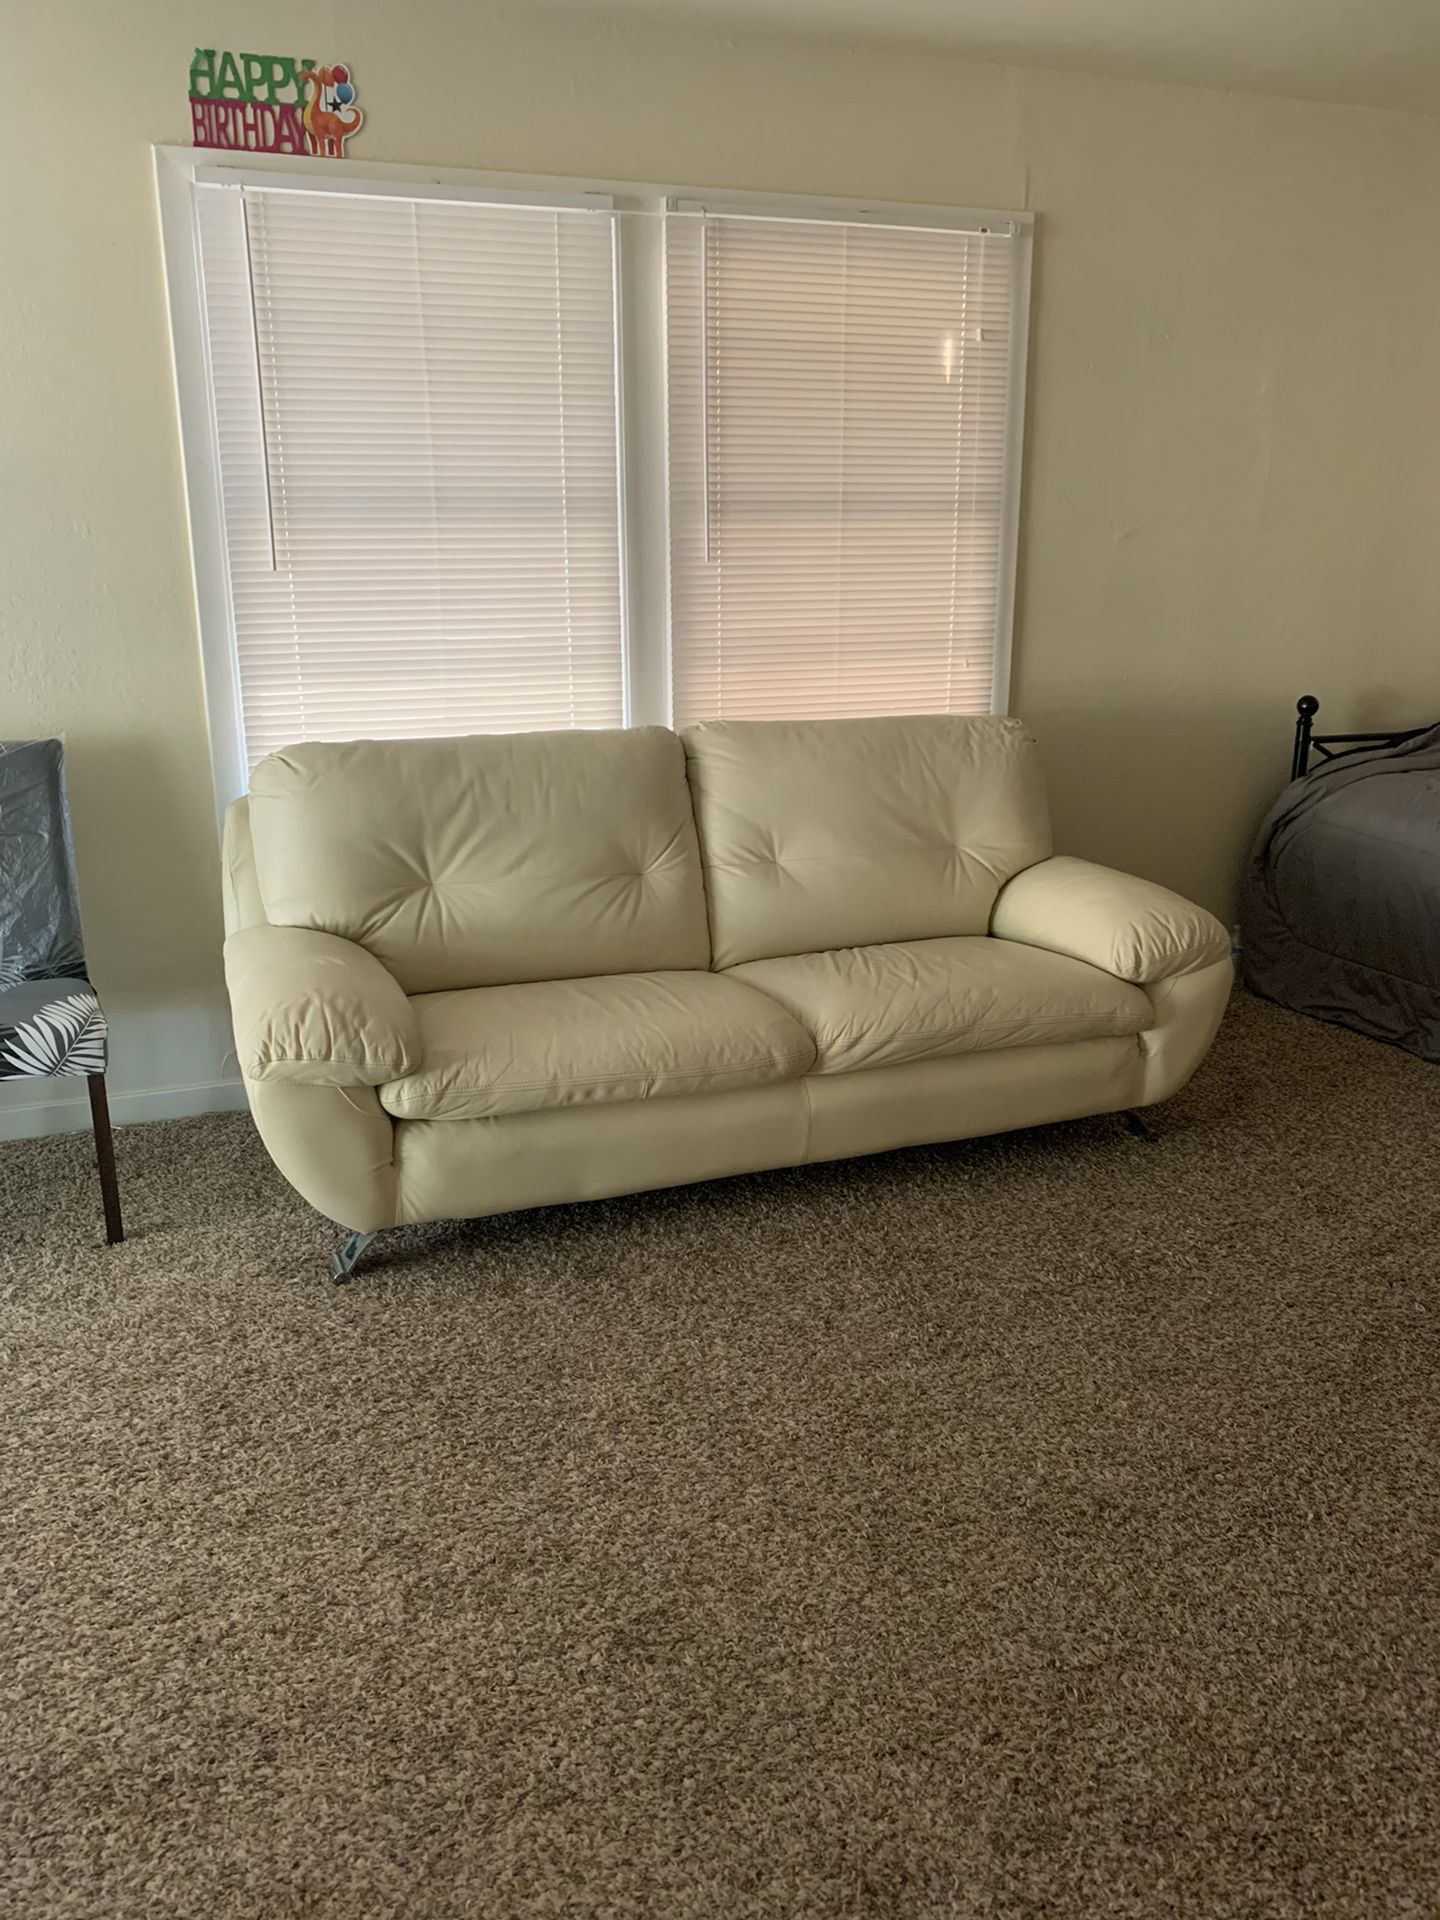 Very Good Condition Heavy Duty White Leather Couch With Like New Coffee Table 